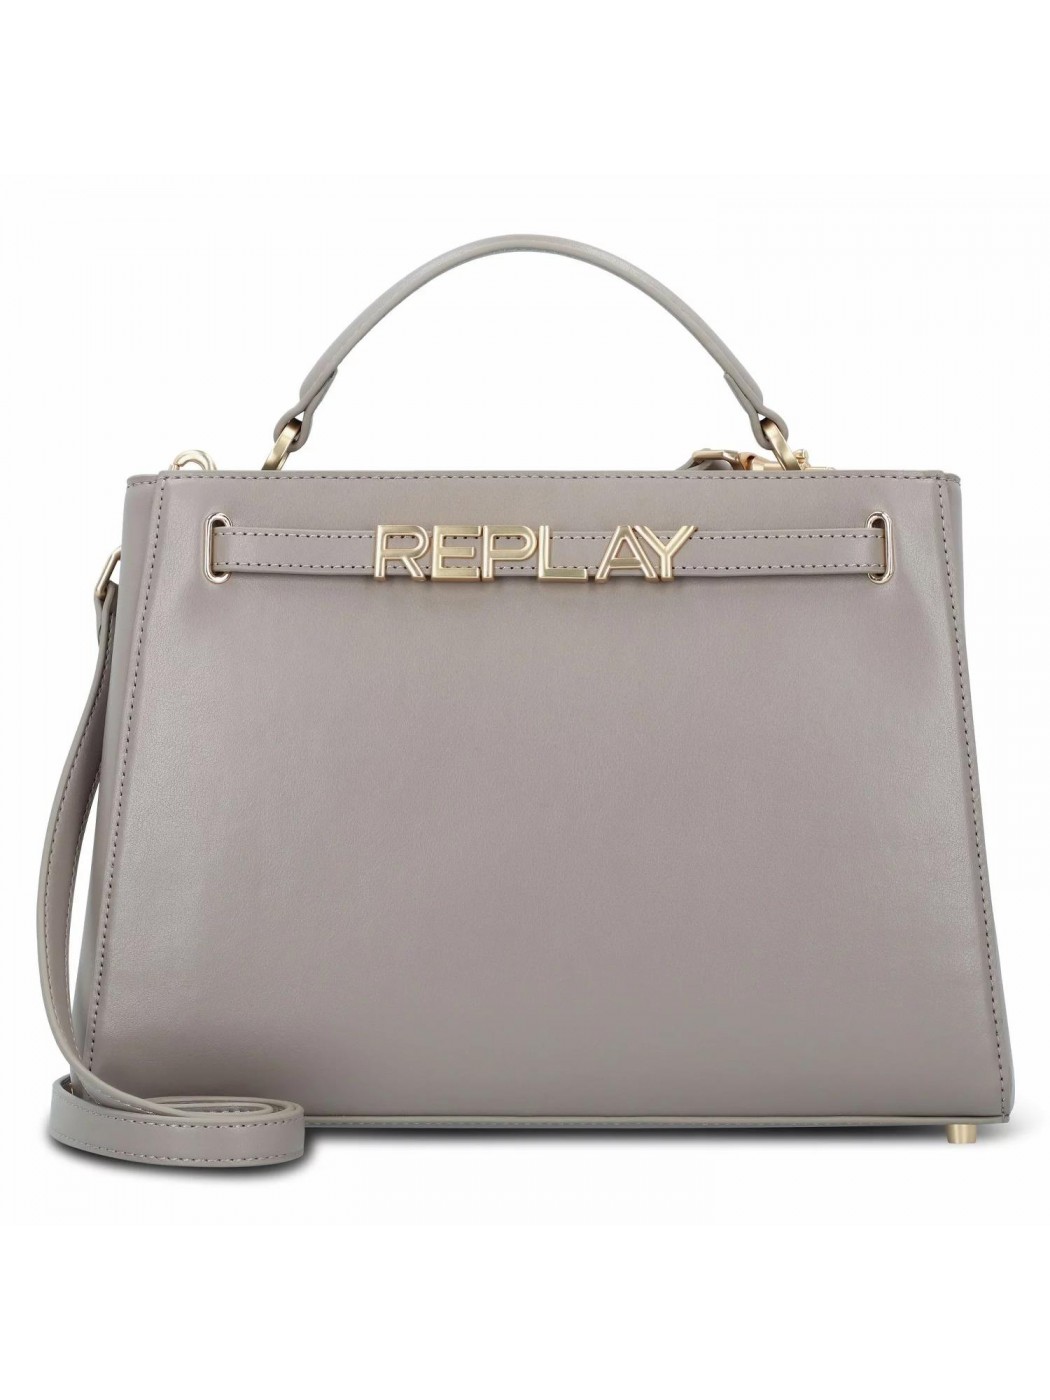 BOLSO REPLAY MUJER TAUPE